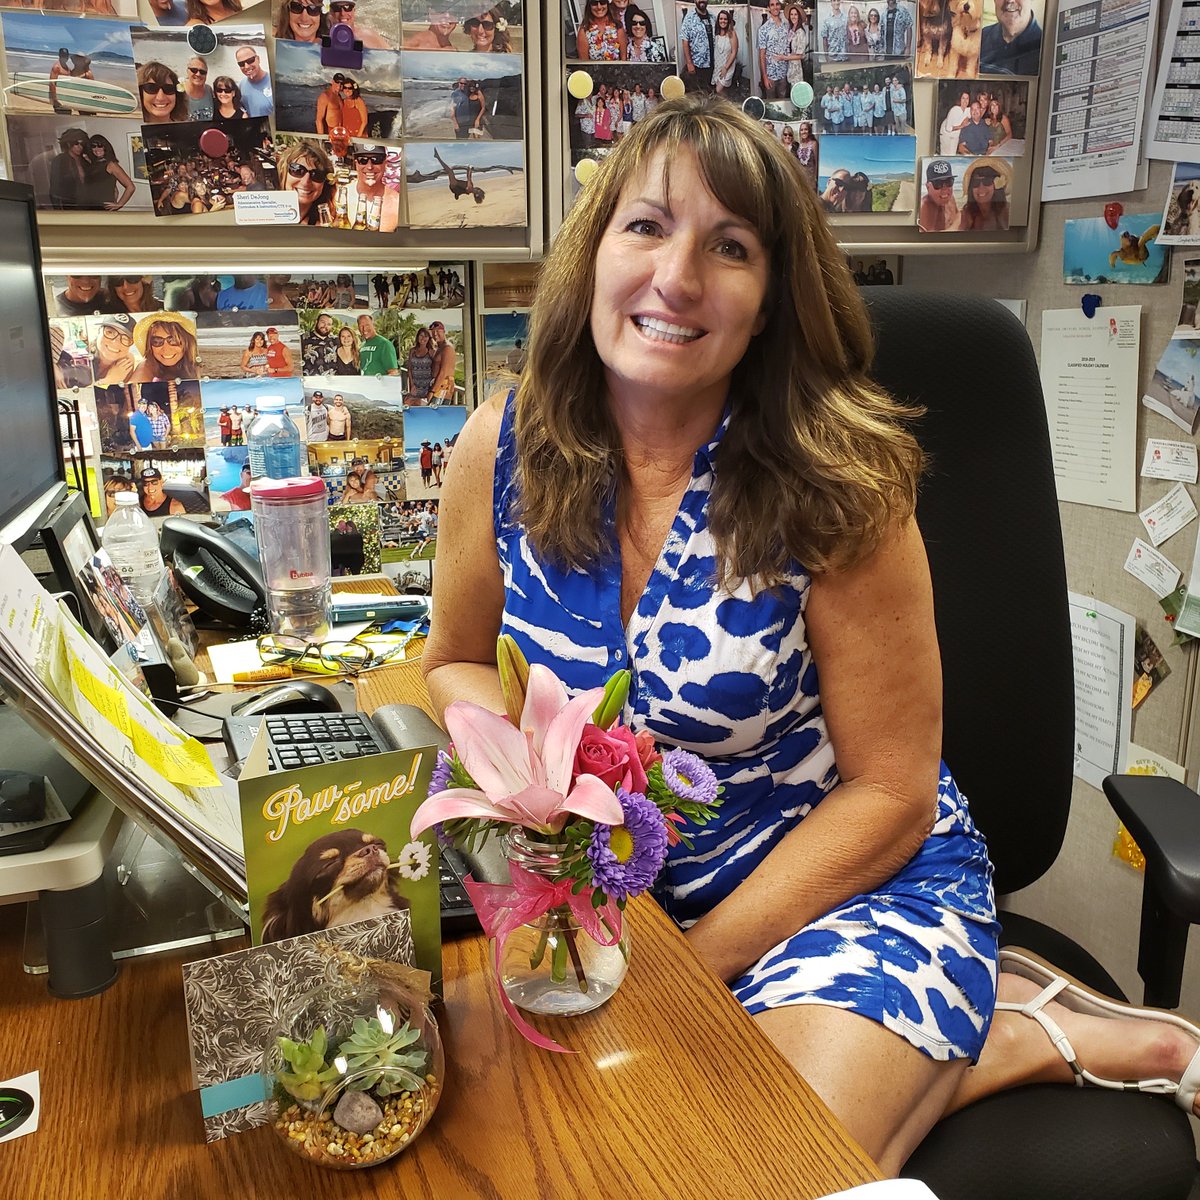 Happy Administrative Professional's Day to all! Thanks to Sheri DeJong for being the glue that holds our Ventura CTE team together. @SchoolVentura @DrRogerRice @CaliforniaCTE @CareerEdCenter